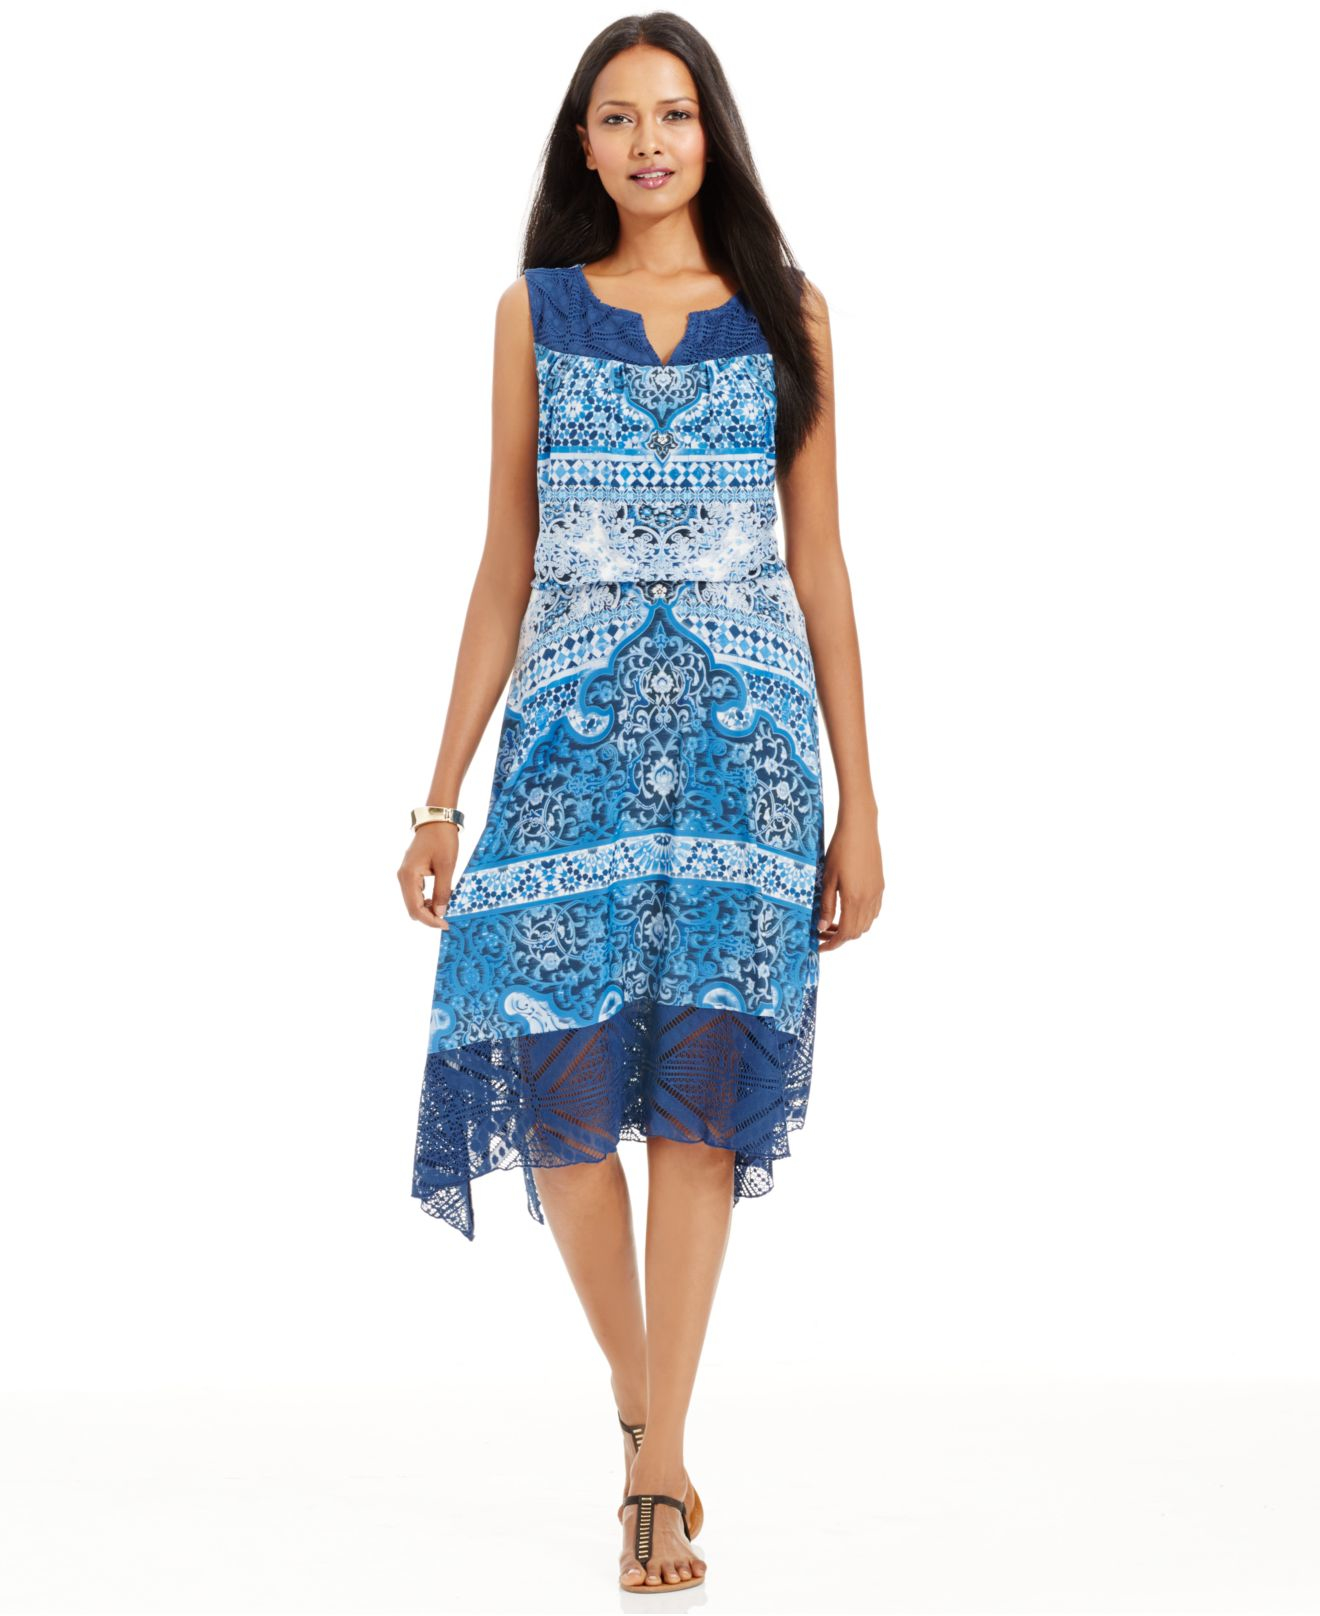 Lyst - Style & Co. Floral-print Lace Midi Dress in Blue